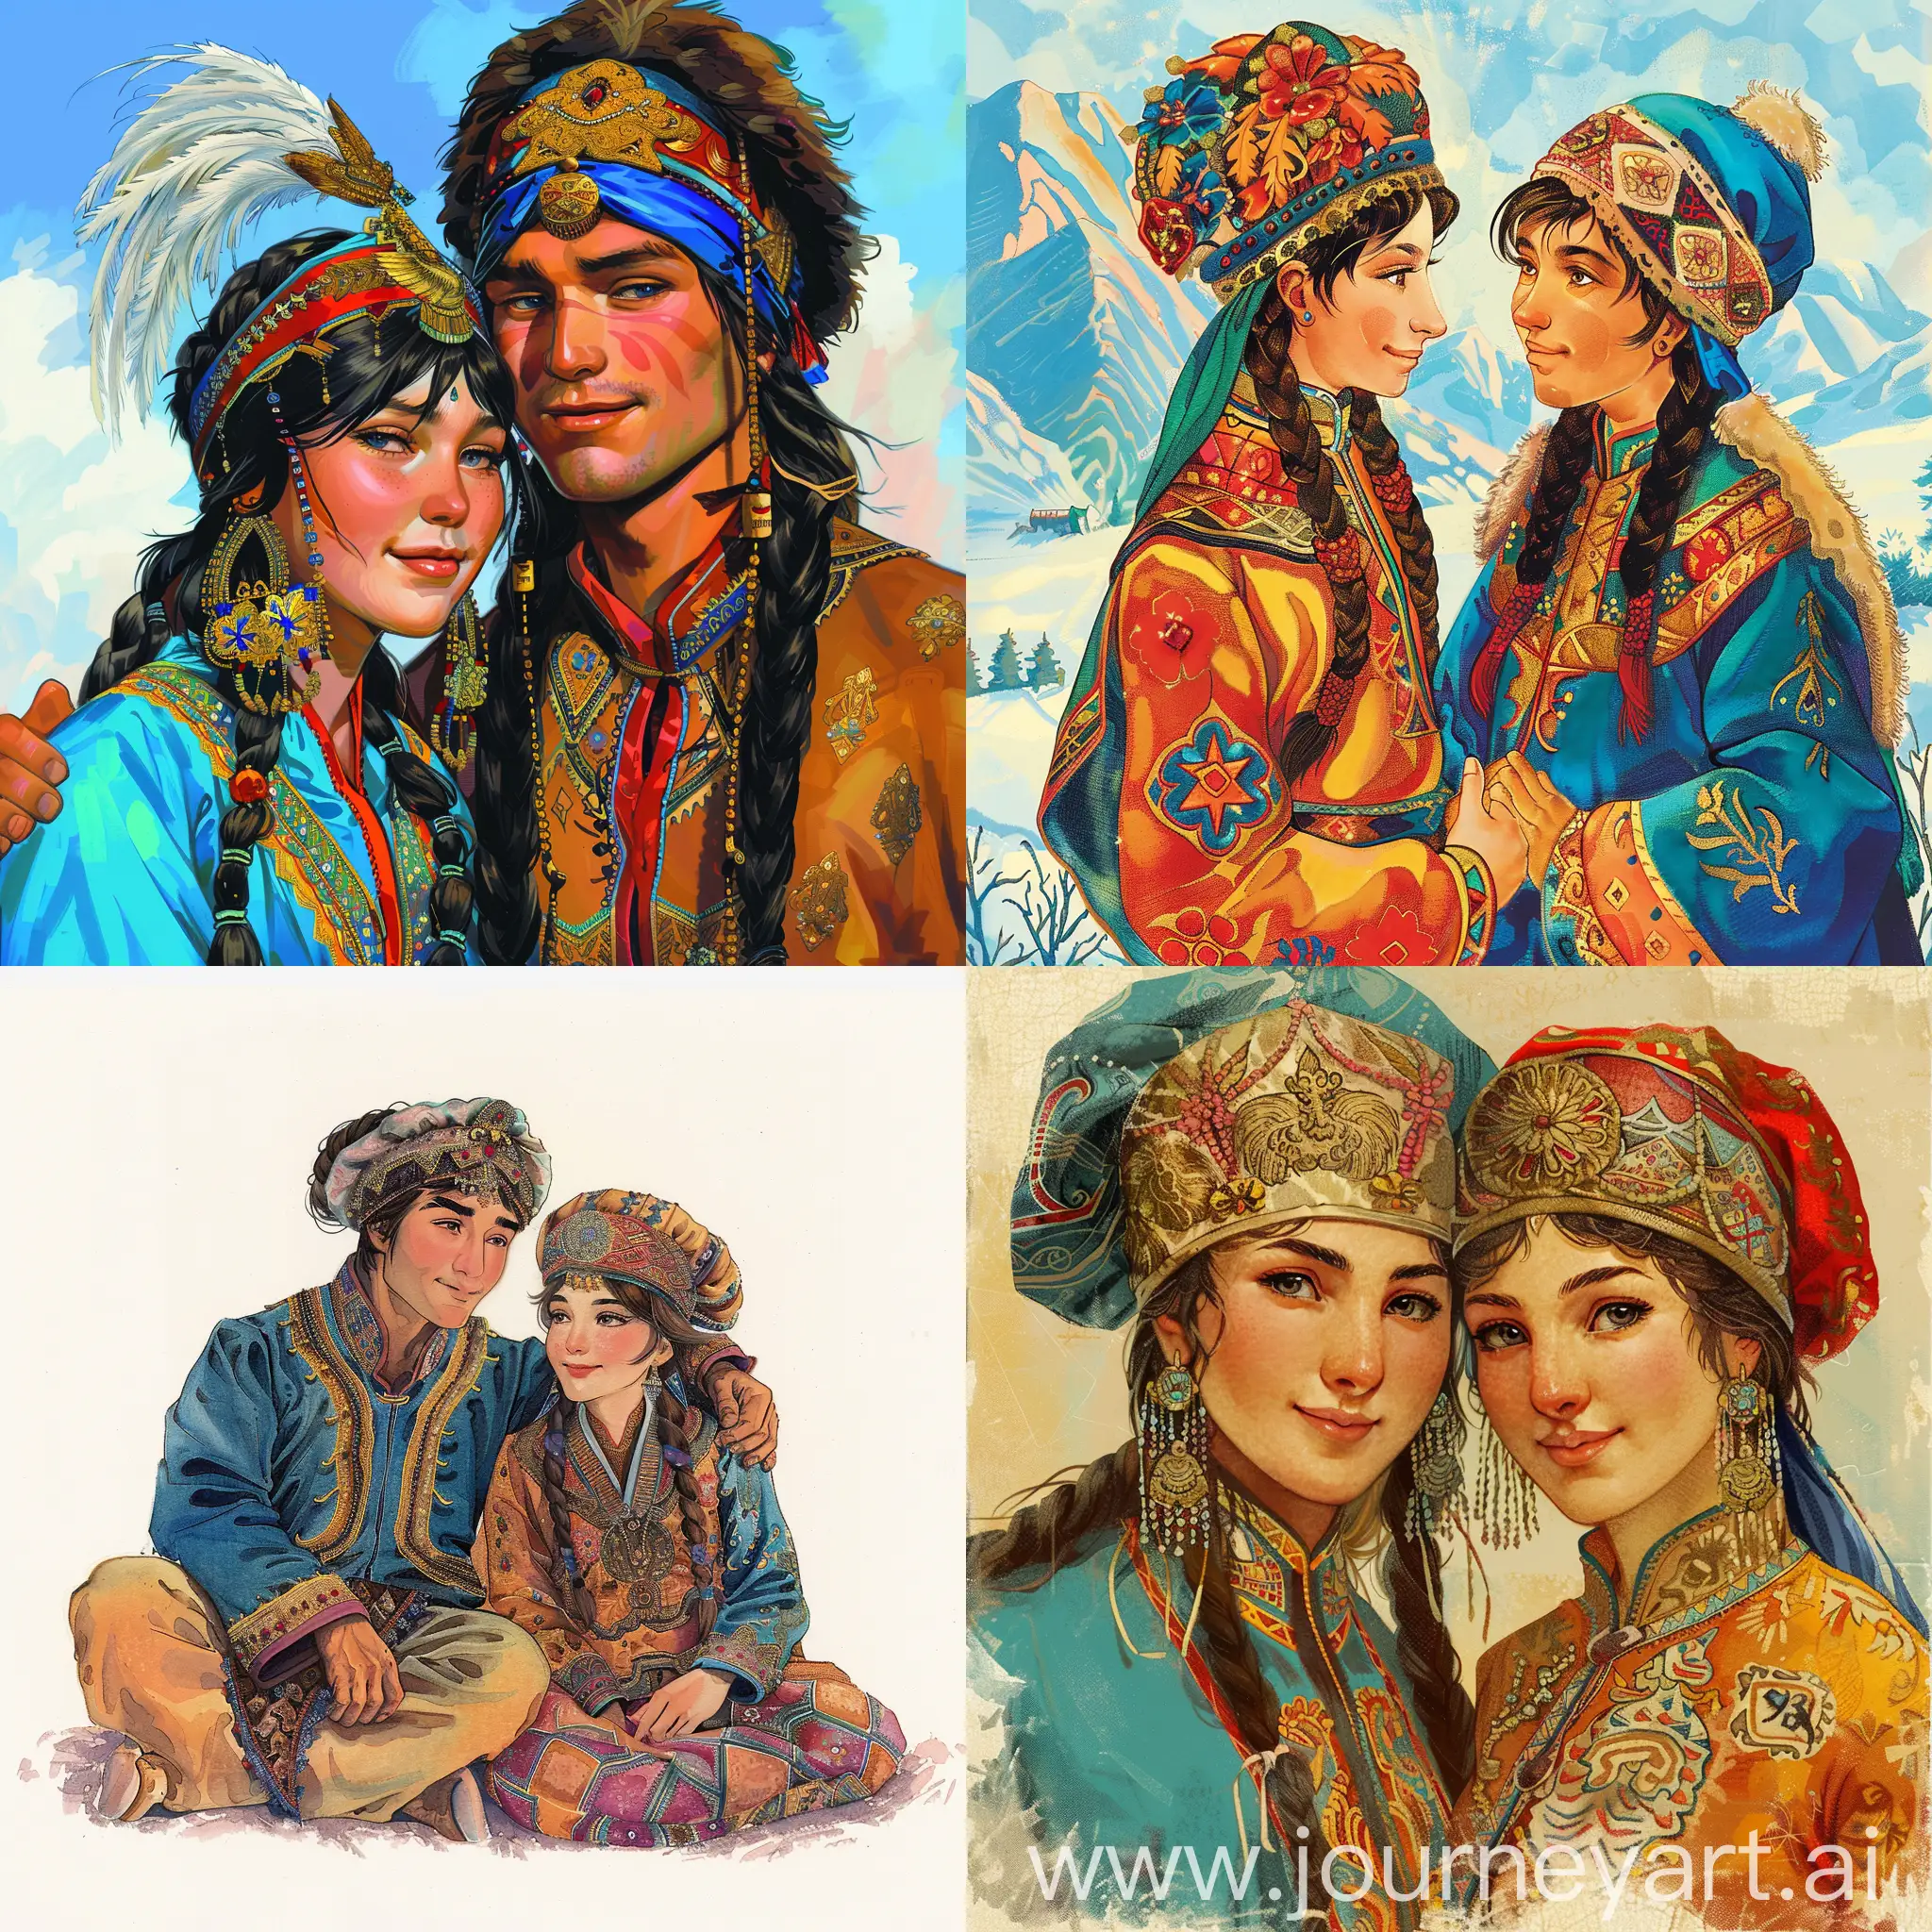 Give me the picture of two Kazakh lovers in story books